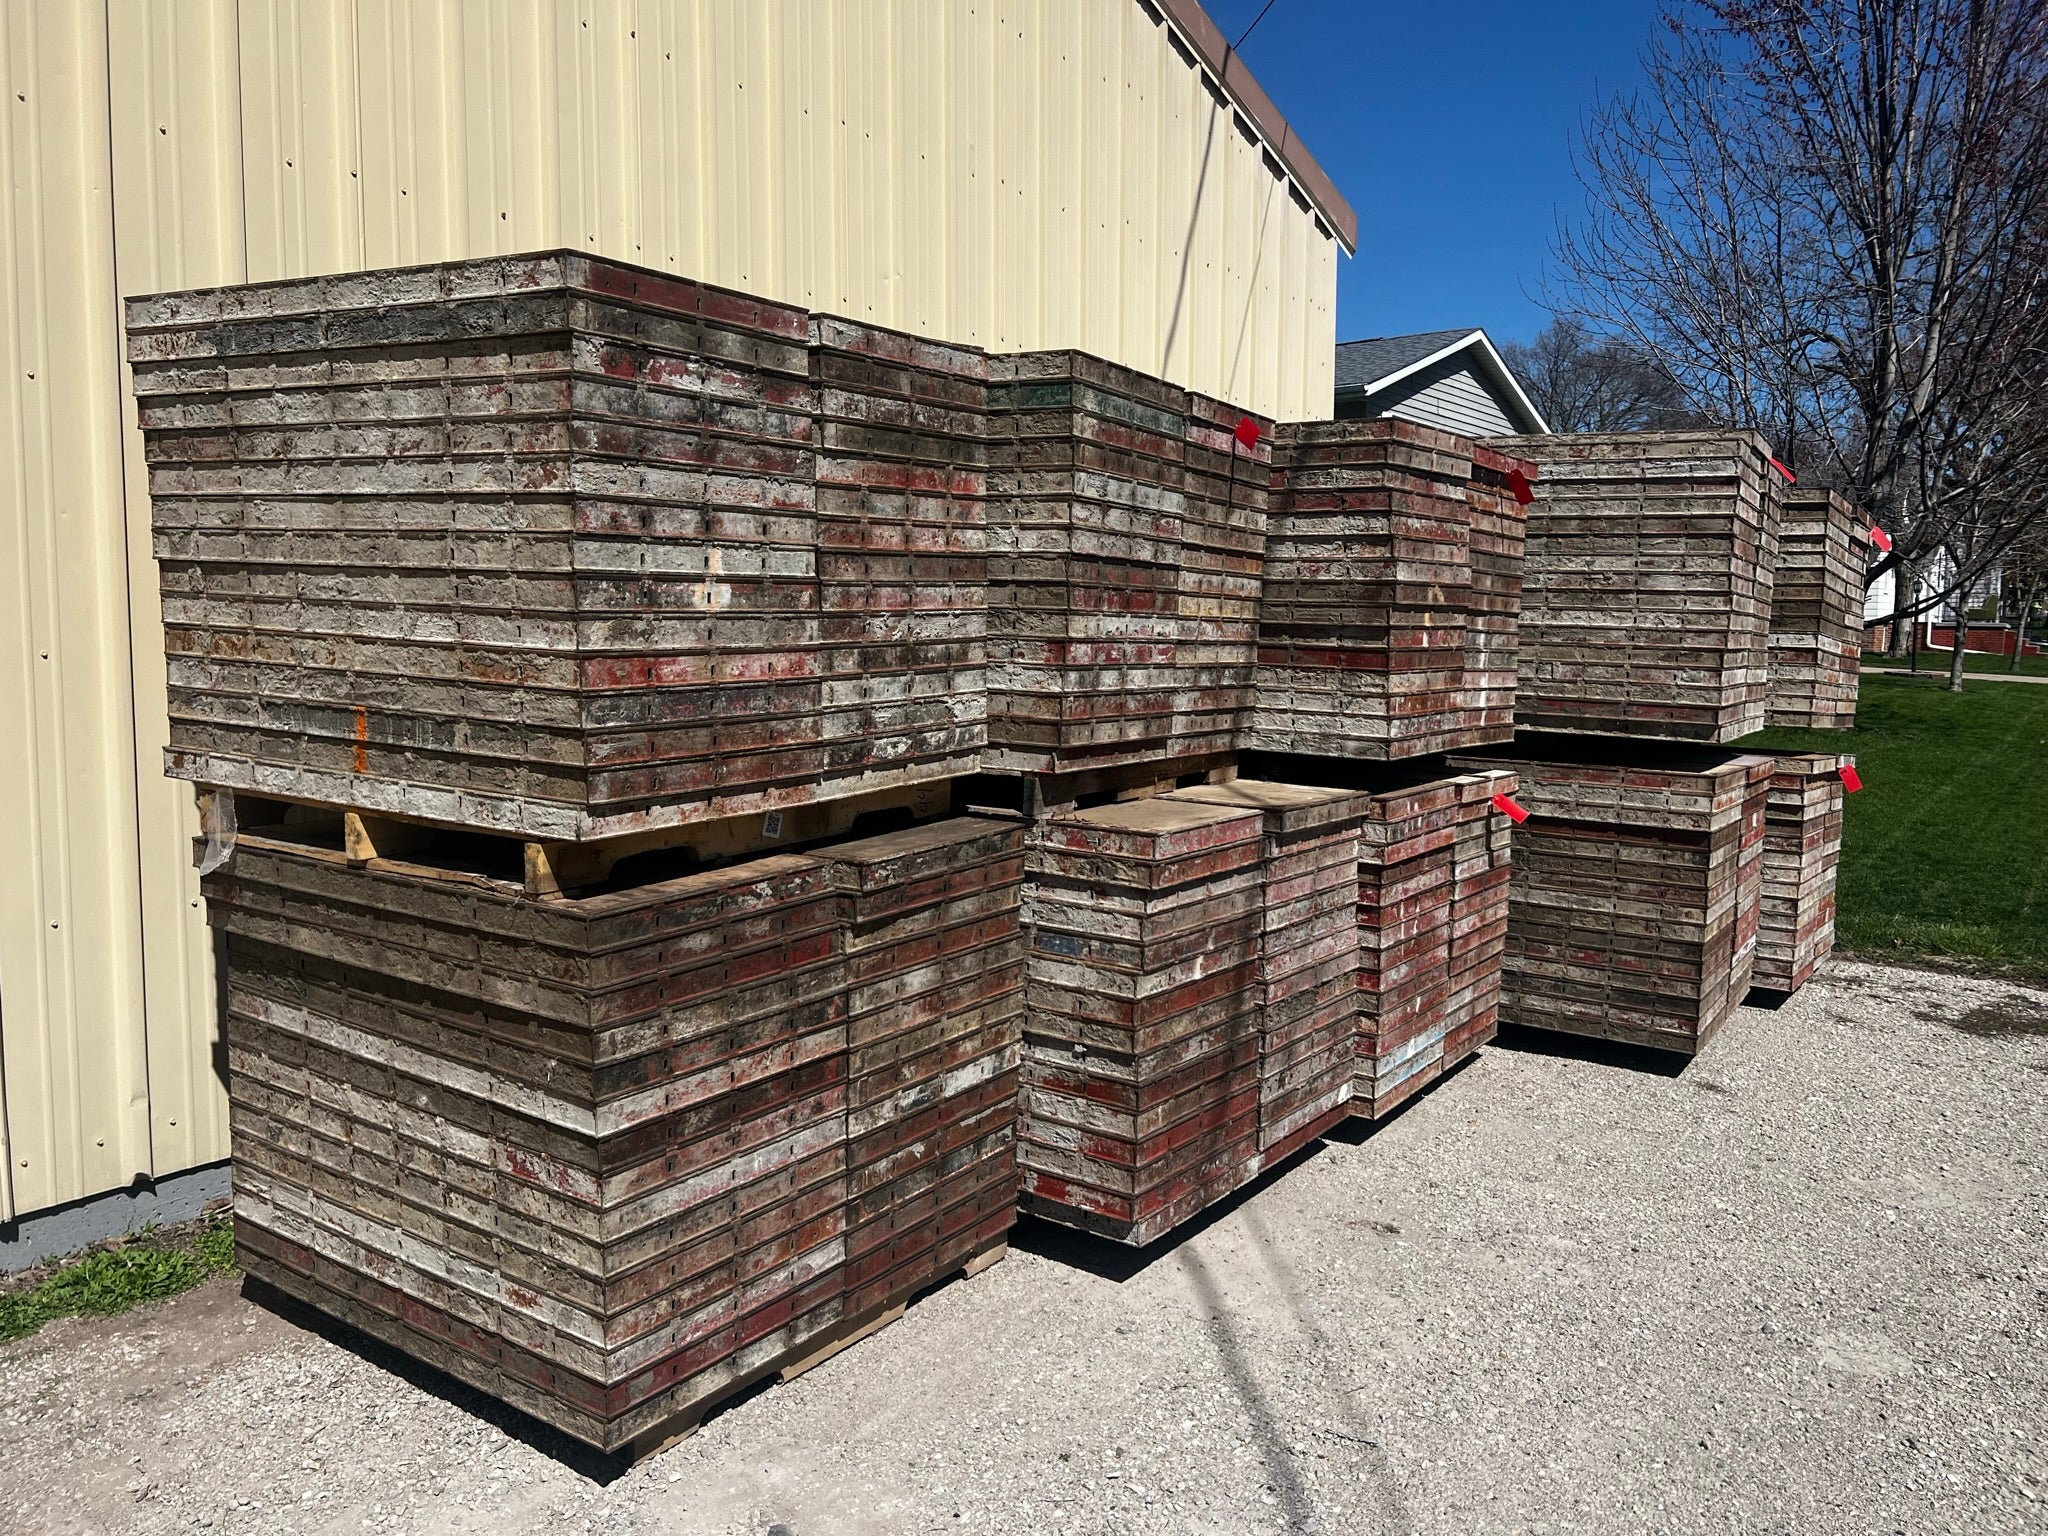 Symons Steel-Ply Concrete Forms